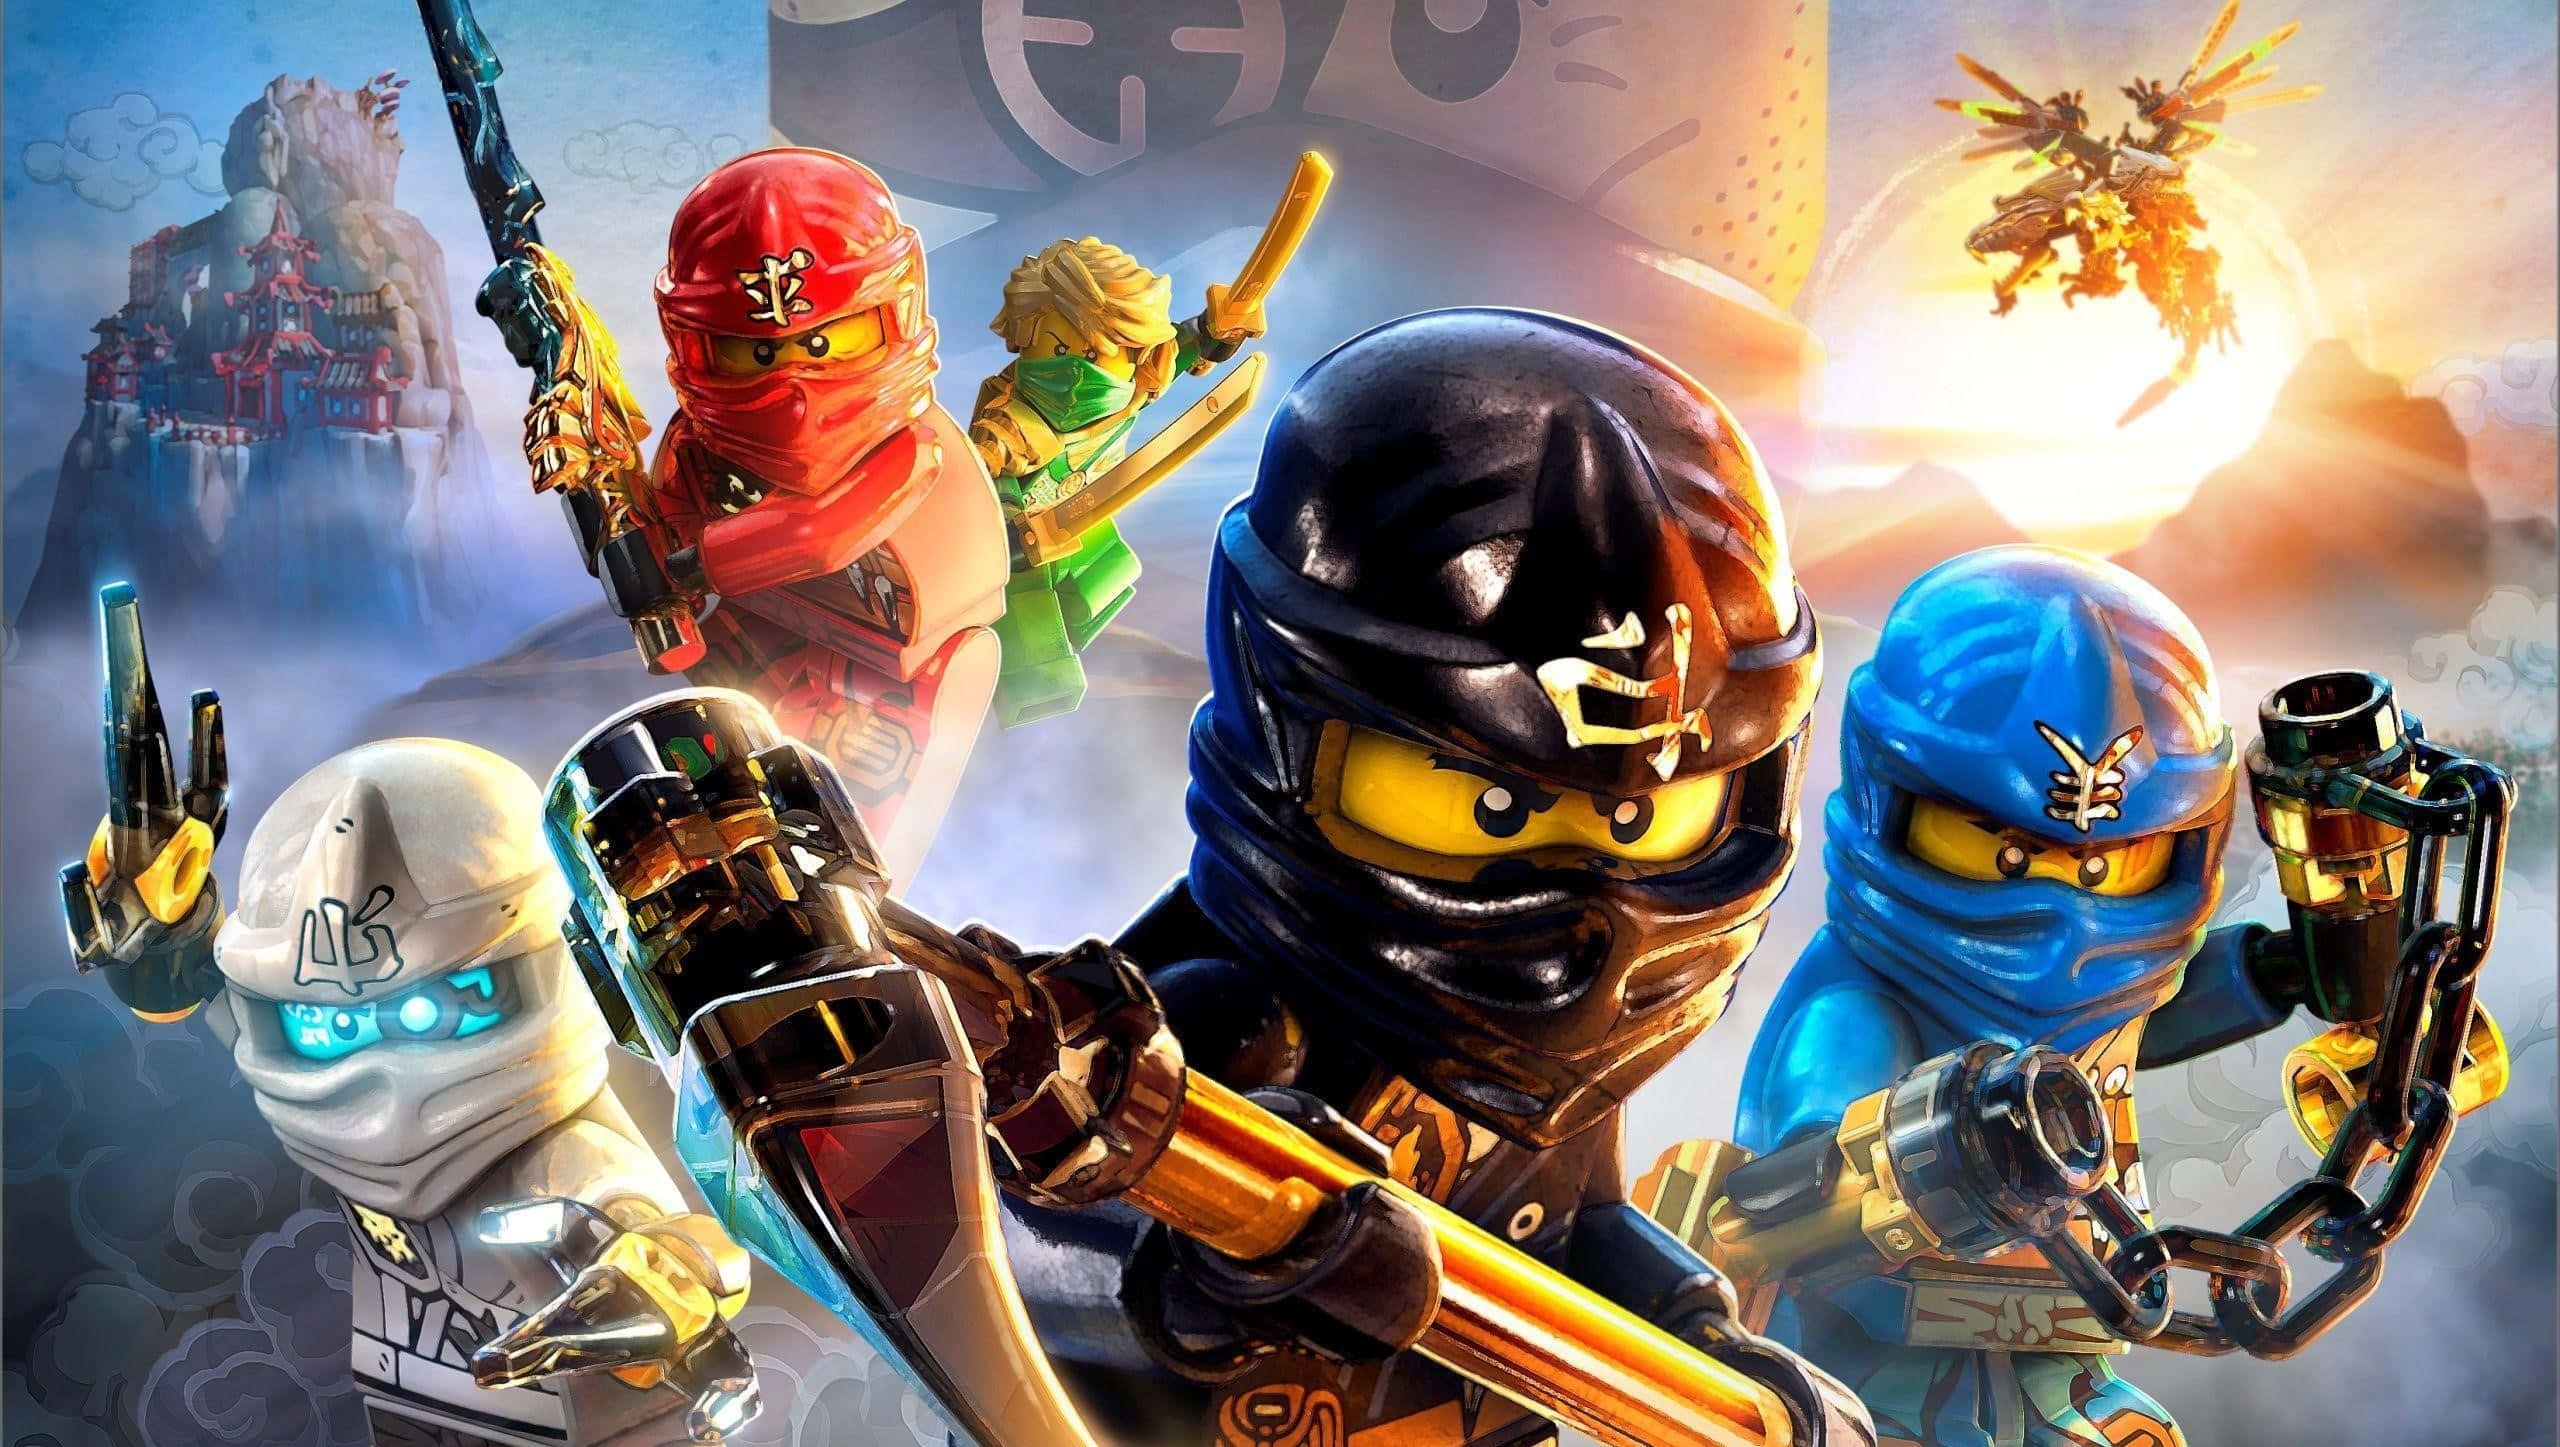 Exciting Ninjago Heroes in Action